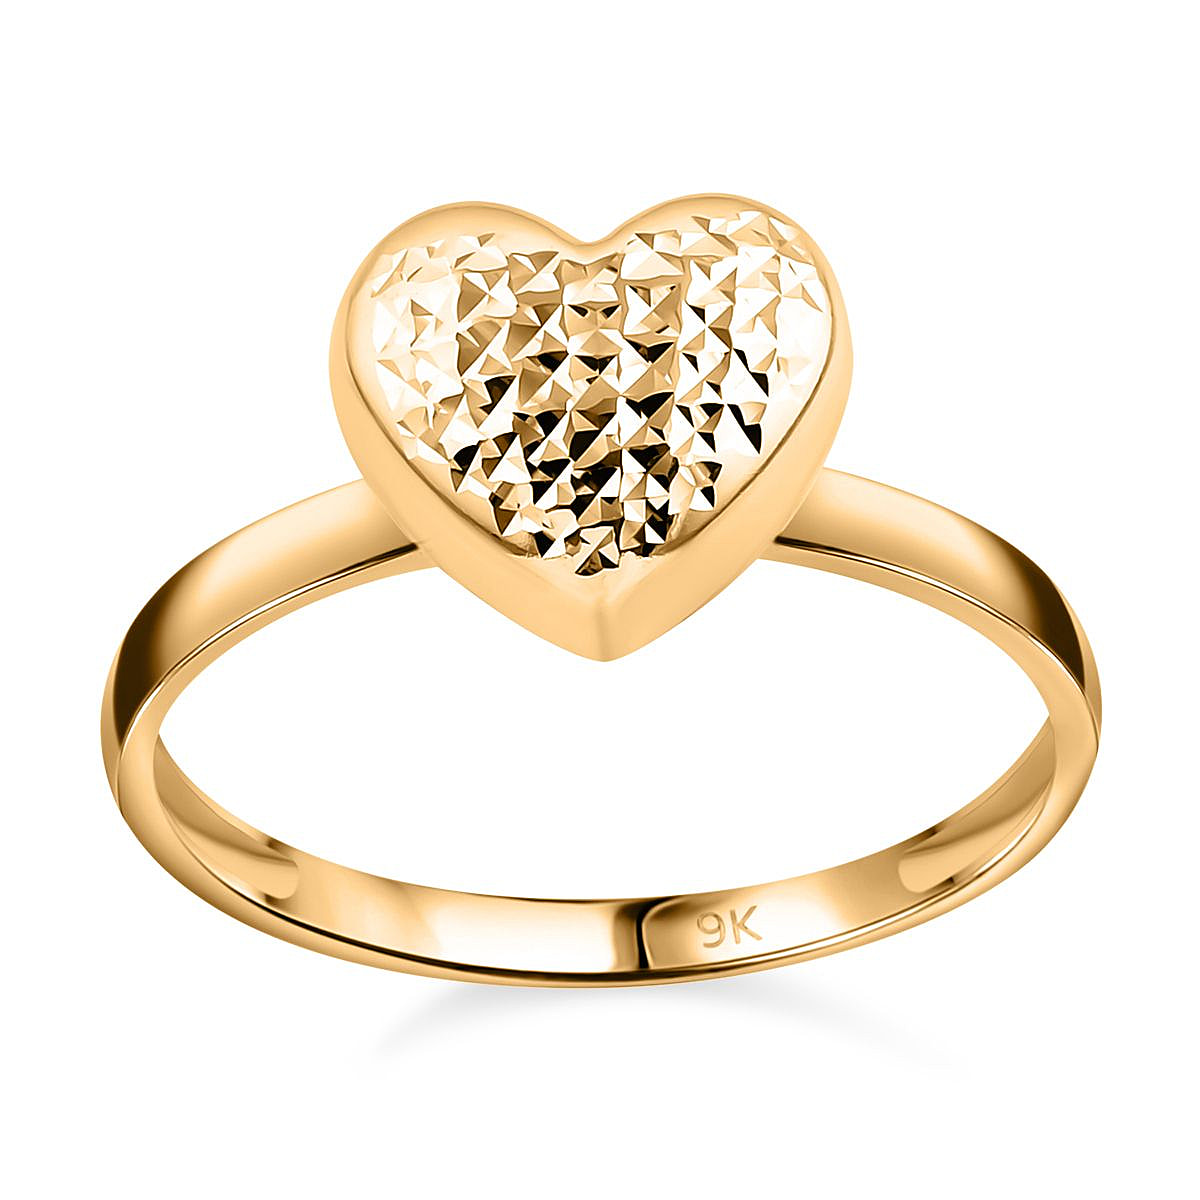 Valentine Special Deal - 9K Yellow Gold Heart Ring